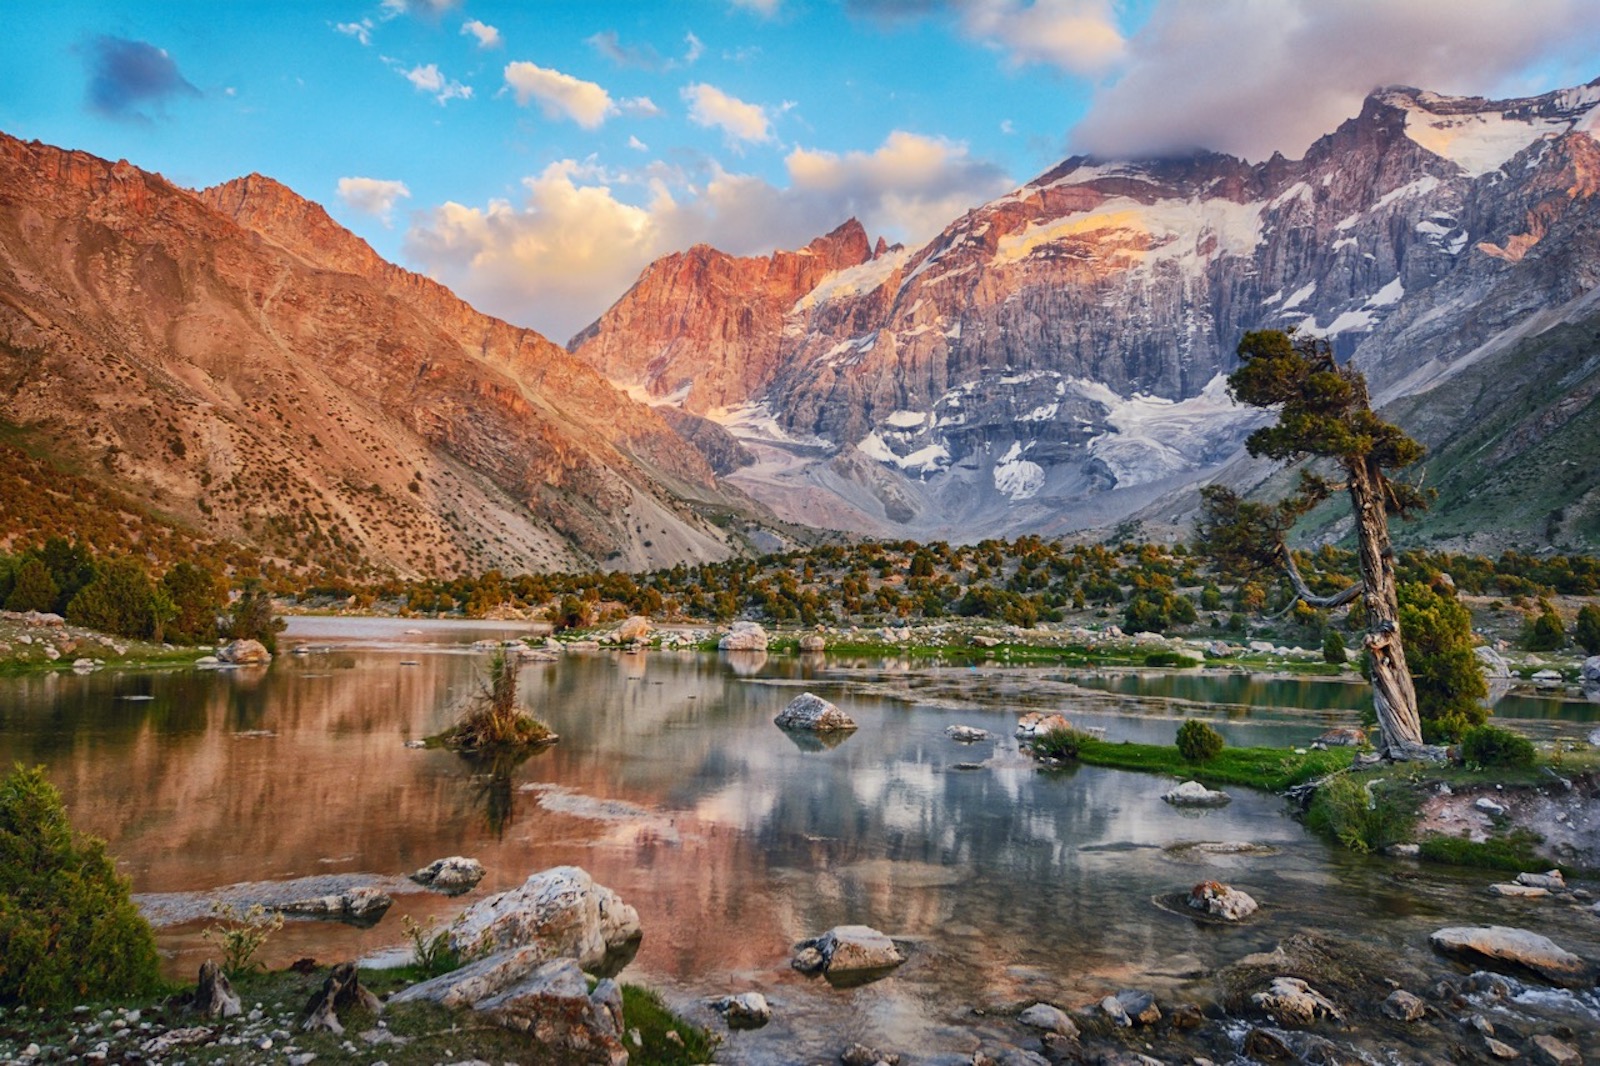 The stunning aesthetics of monuments, crystal-clear mountains, and mesmerizing natural beauty of Tajikistan welcomes you to spend a relaxing vacation with your loved ones. <p>The bubbling hot springs, the enchanting beauty of stargazing, and a deep dive into the land’s rich history are some of the unique experiences offered by this hot destination.</p><p>You can add several places to your bucket list in Tajikistan like Ishkashim town, Langar village, Yashikkul Lake, Murghab, and Dushanbe.</p>